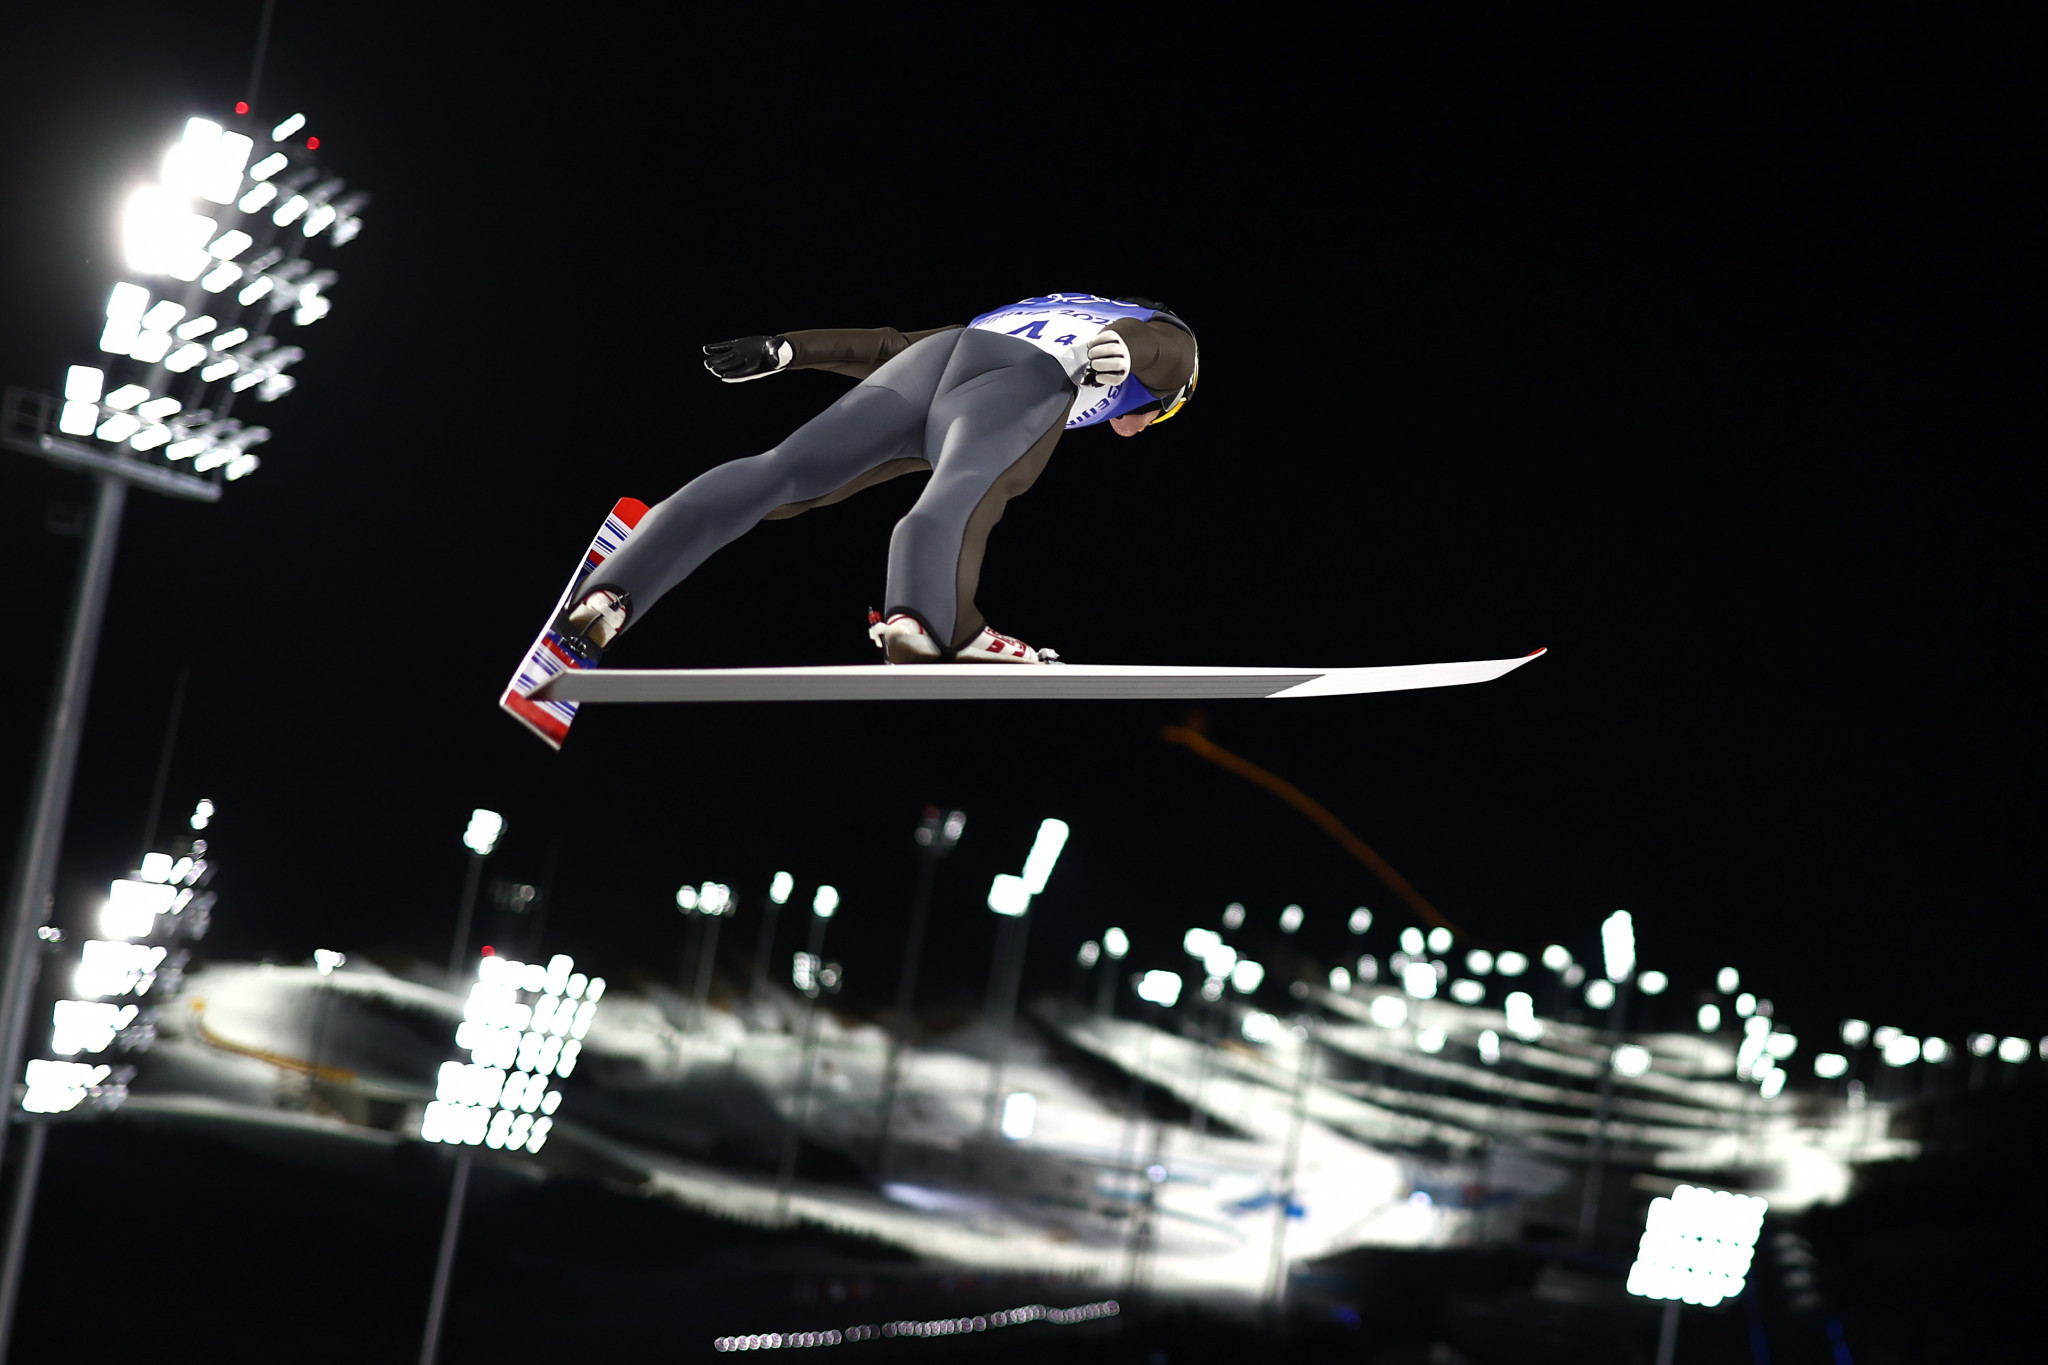 Evgeniy Klimov led the ROC scoring in the mixed team ski jumping event at Beijing 2022 ©Getty Images